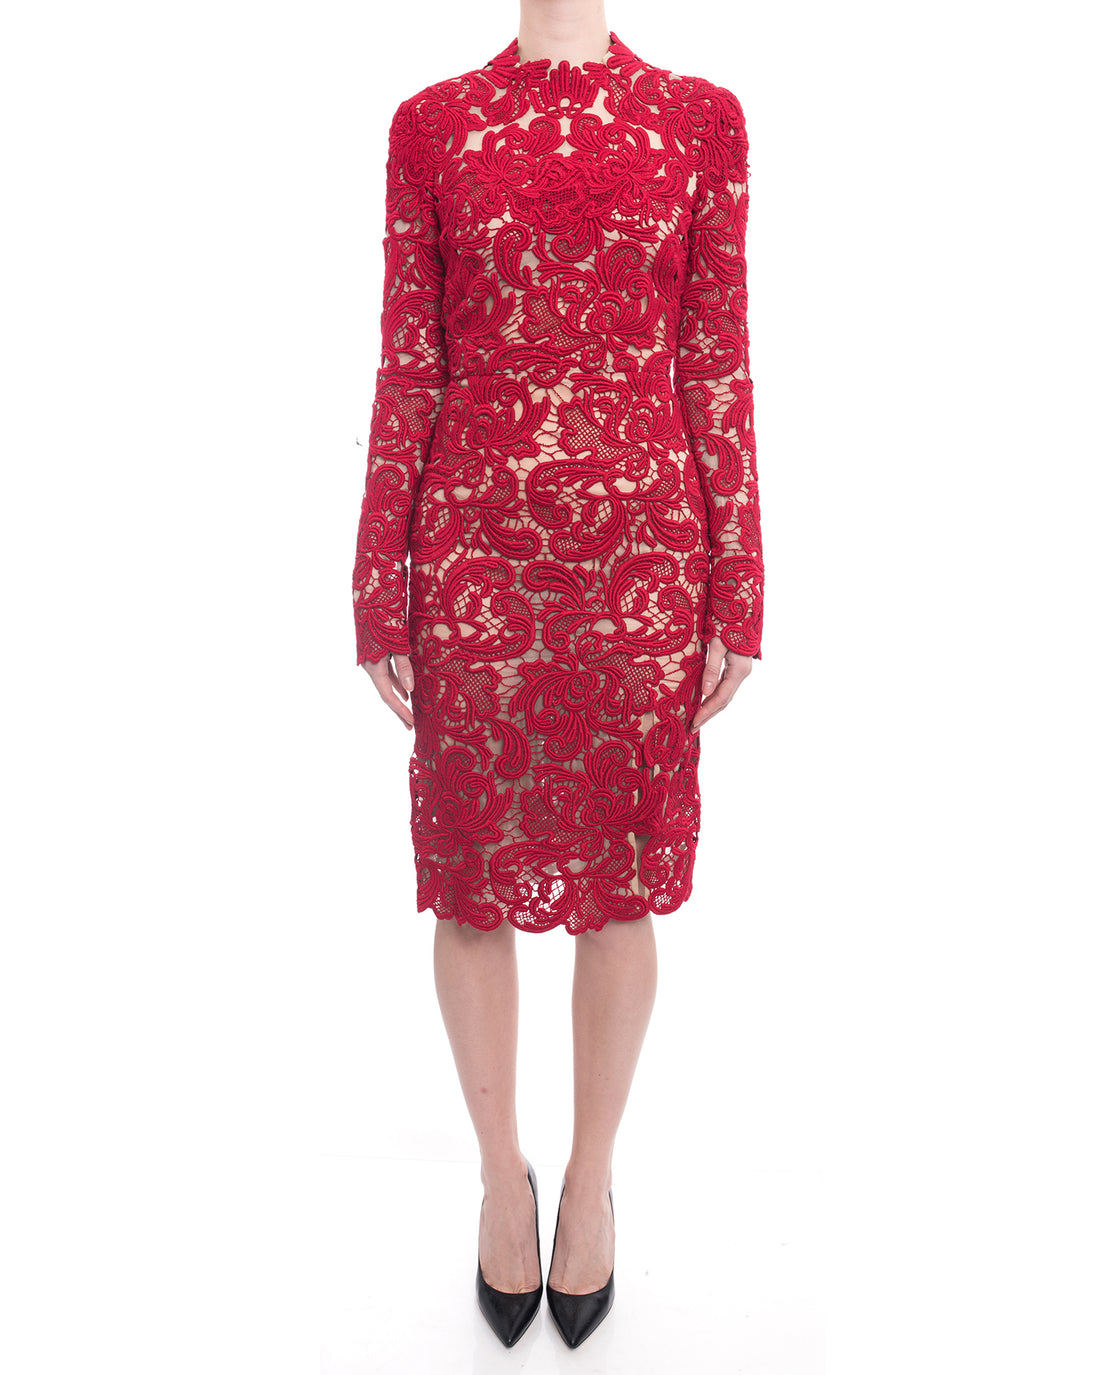 Erdem Fall 2015 Red Guipure Lace Long Sleeve Cocktail Dress - 2/4